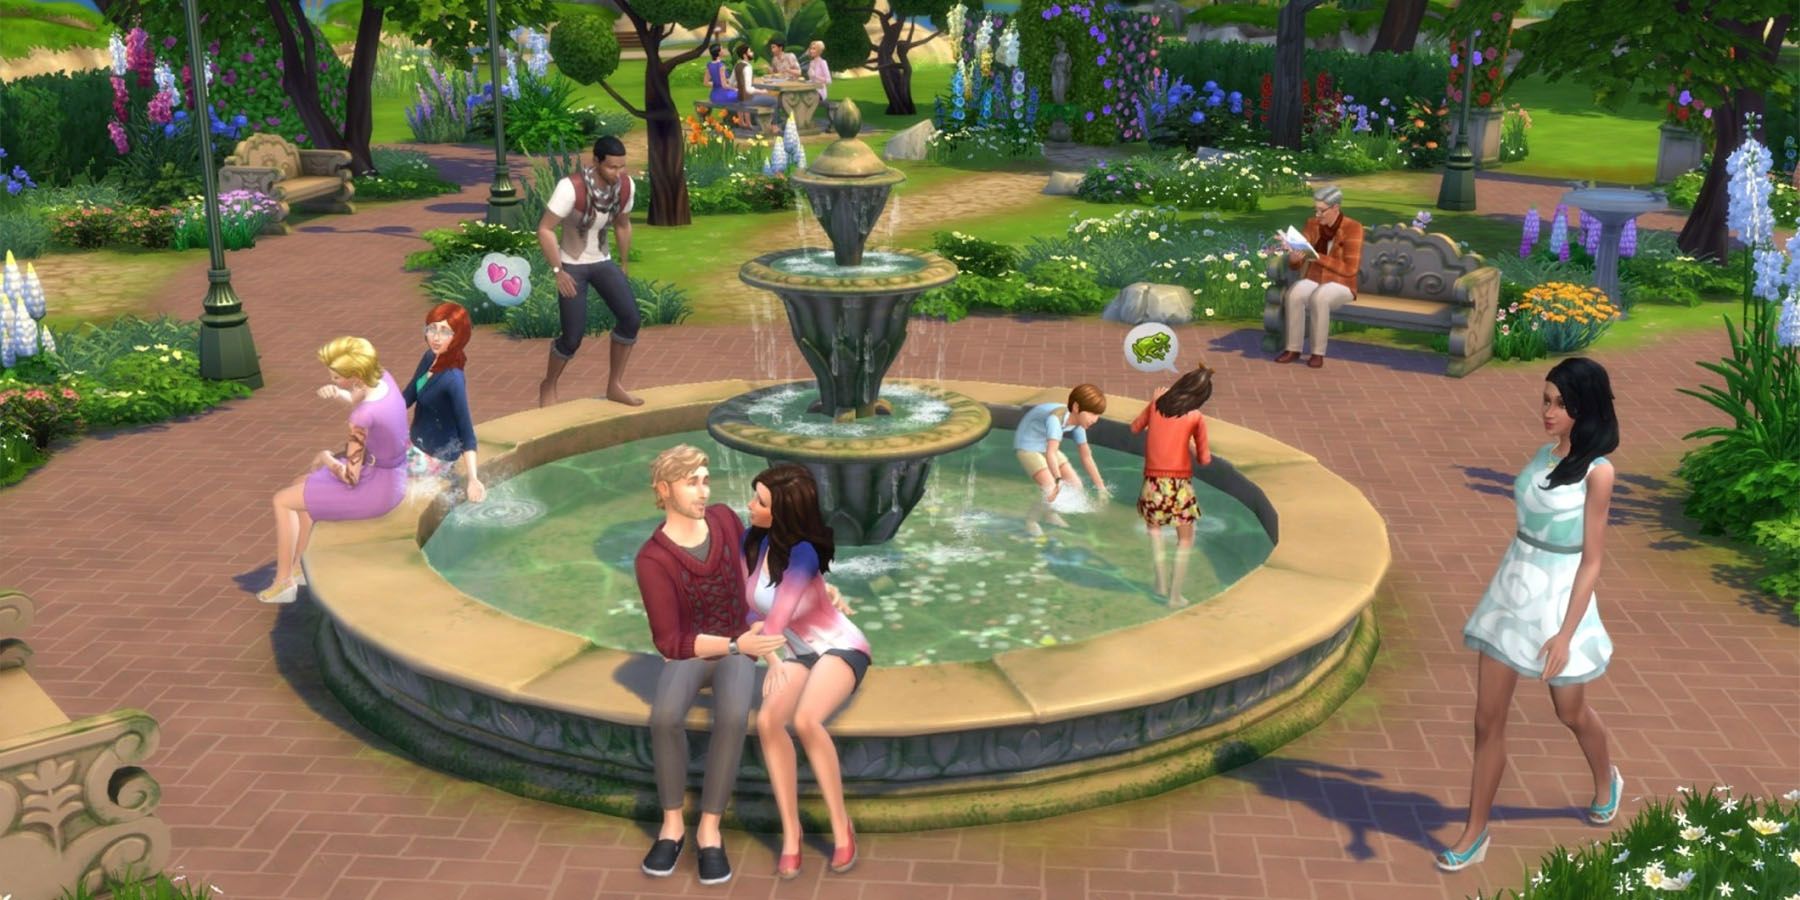 How To Use Relationship Cheats In The Sims 4